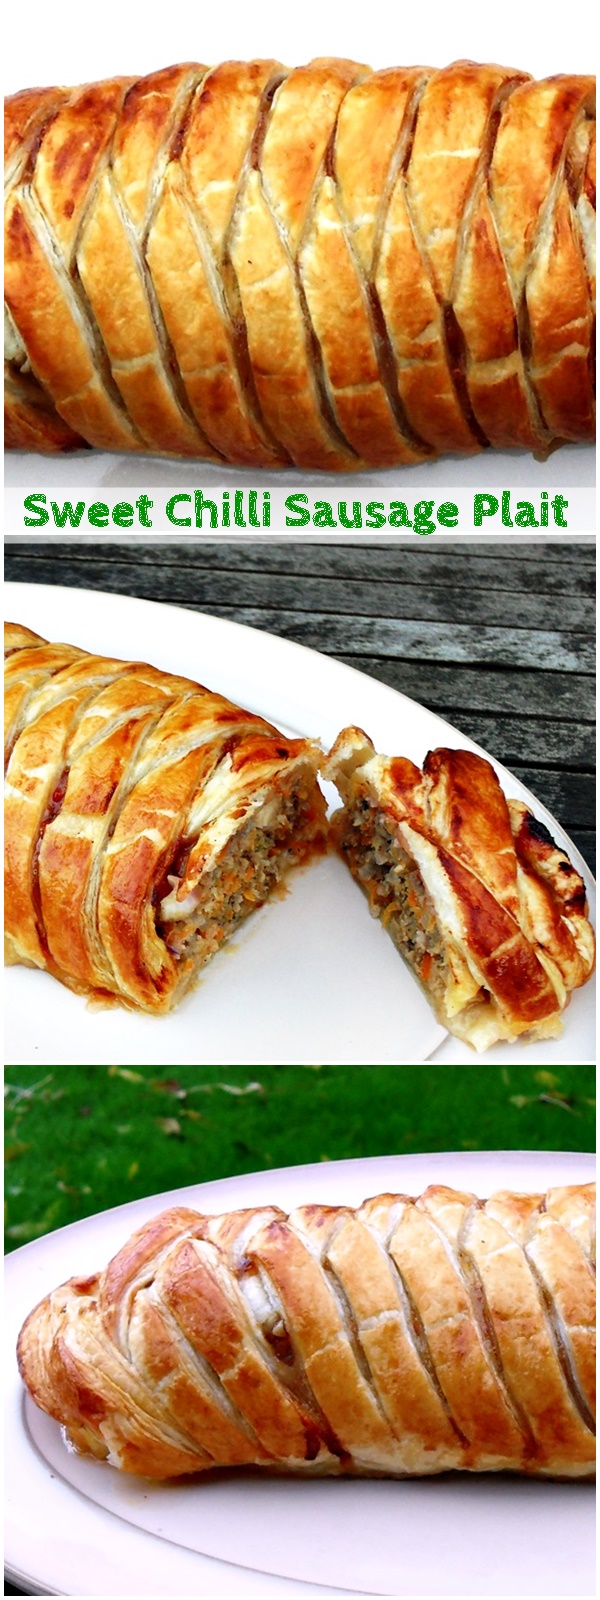 Sweet Chilli Sausage Plait is totally delicious and contains hidden veggies! Great hot or cold! #sausage #plait #picnic #sausageroll #baking #sausagemeat 